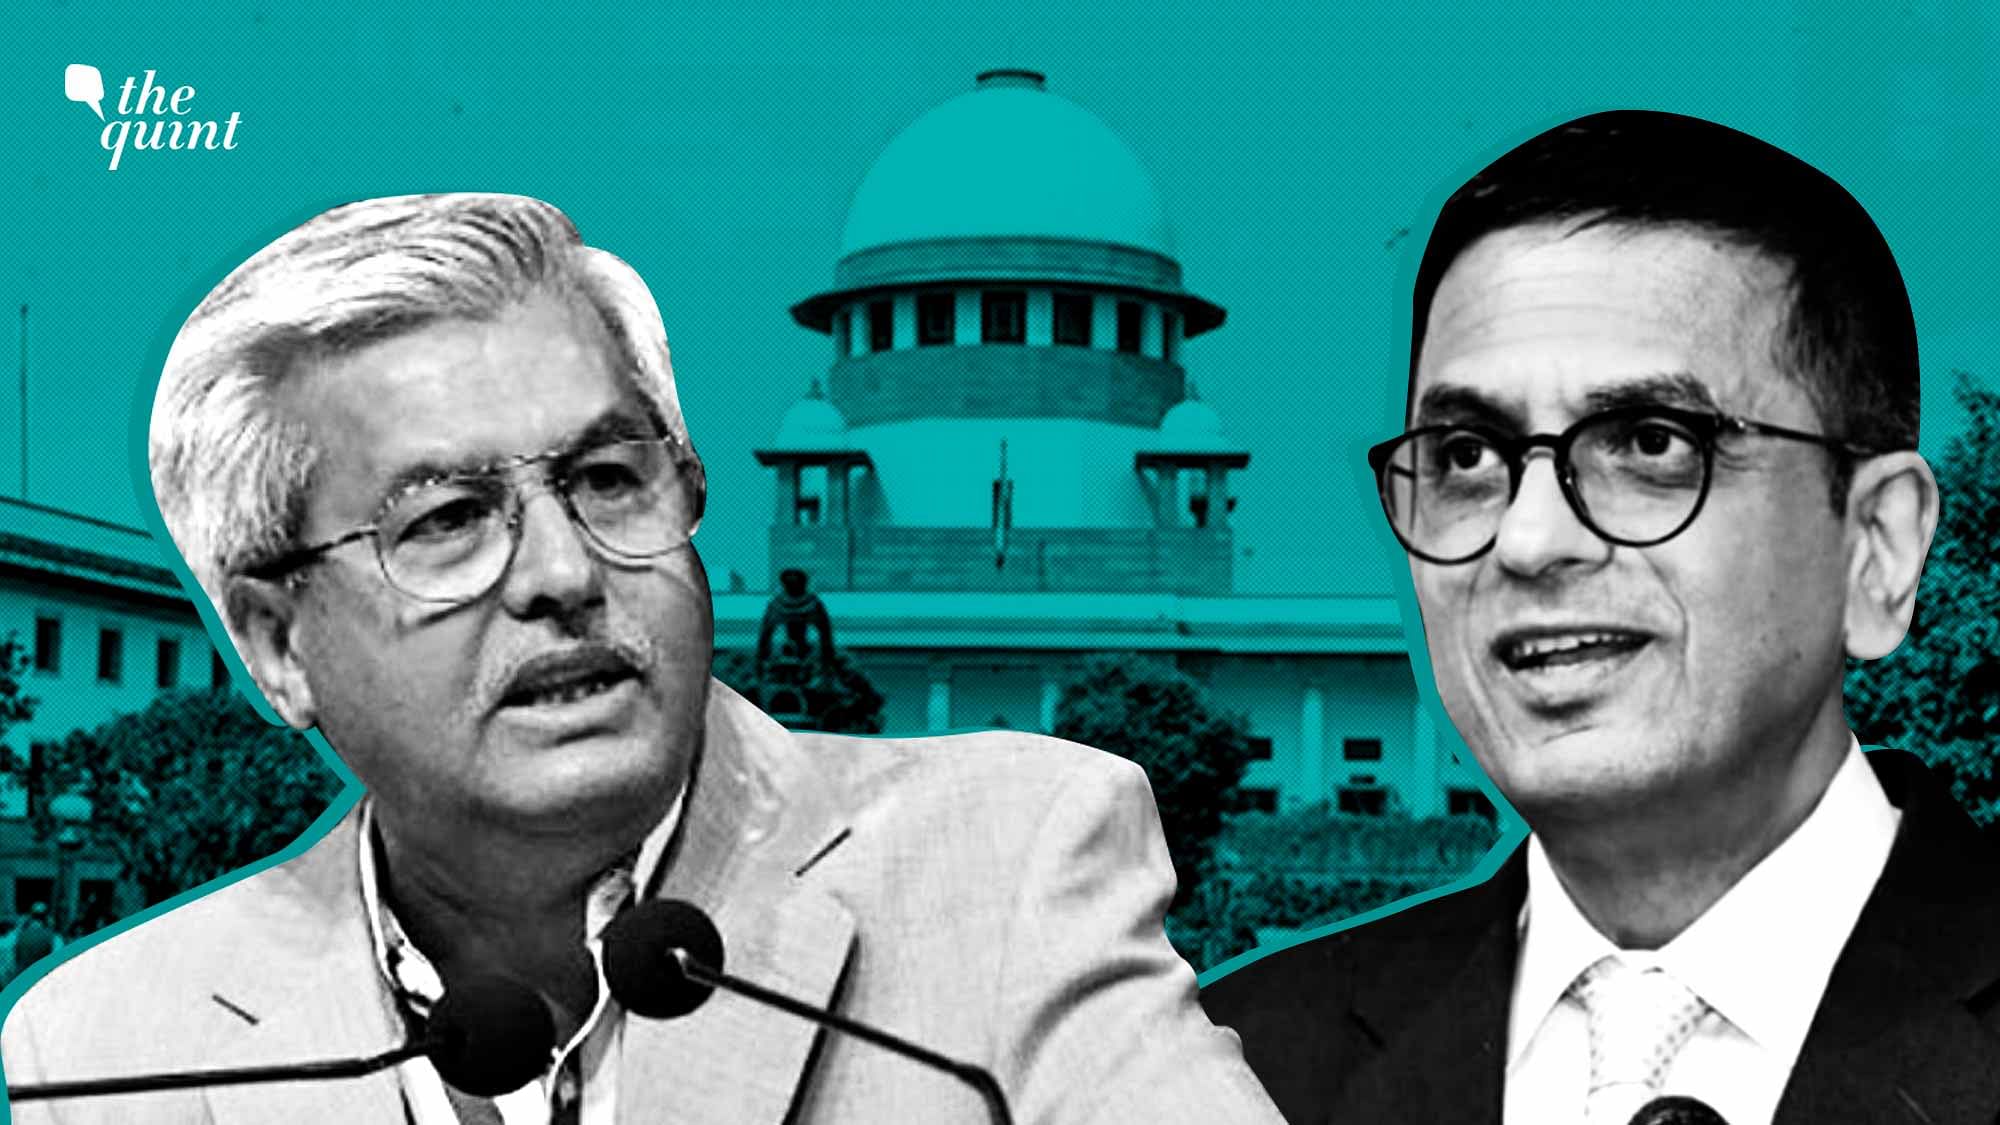 Case Deleted, Sensitive Matters Re-Assigned? What is Happening in Supreme Court?